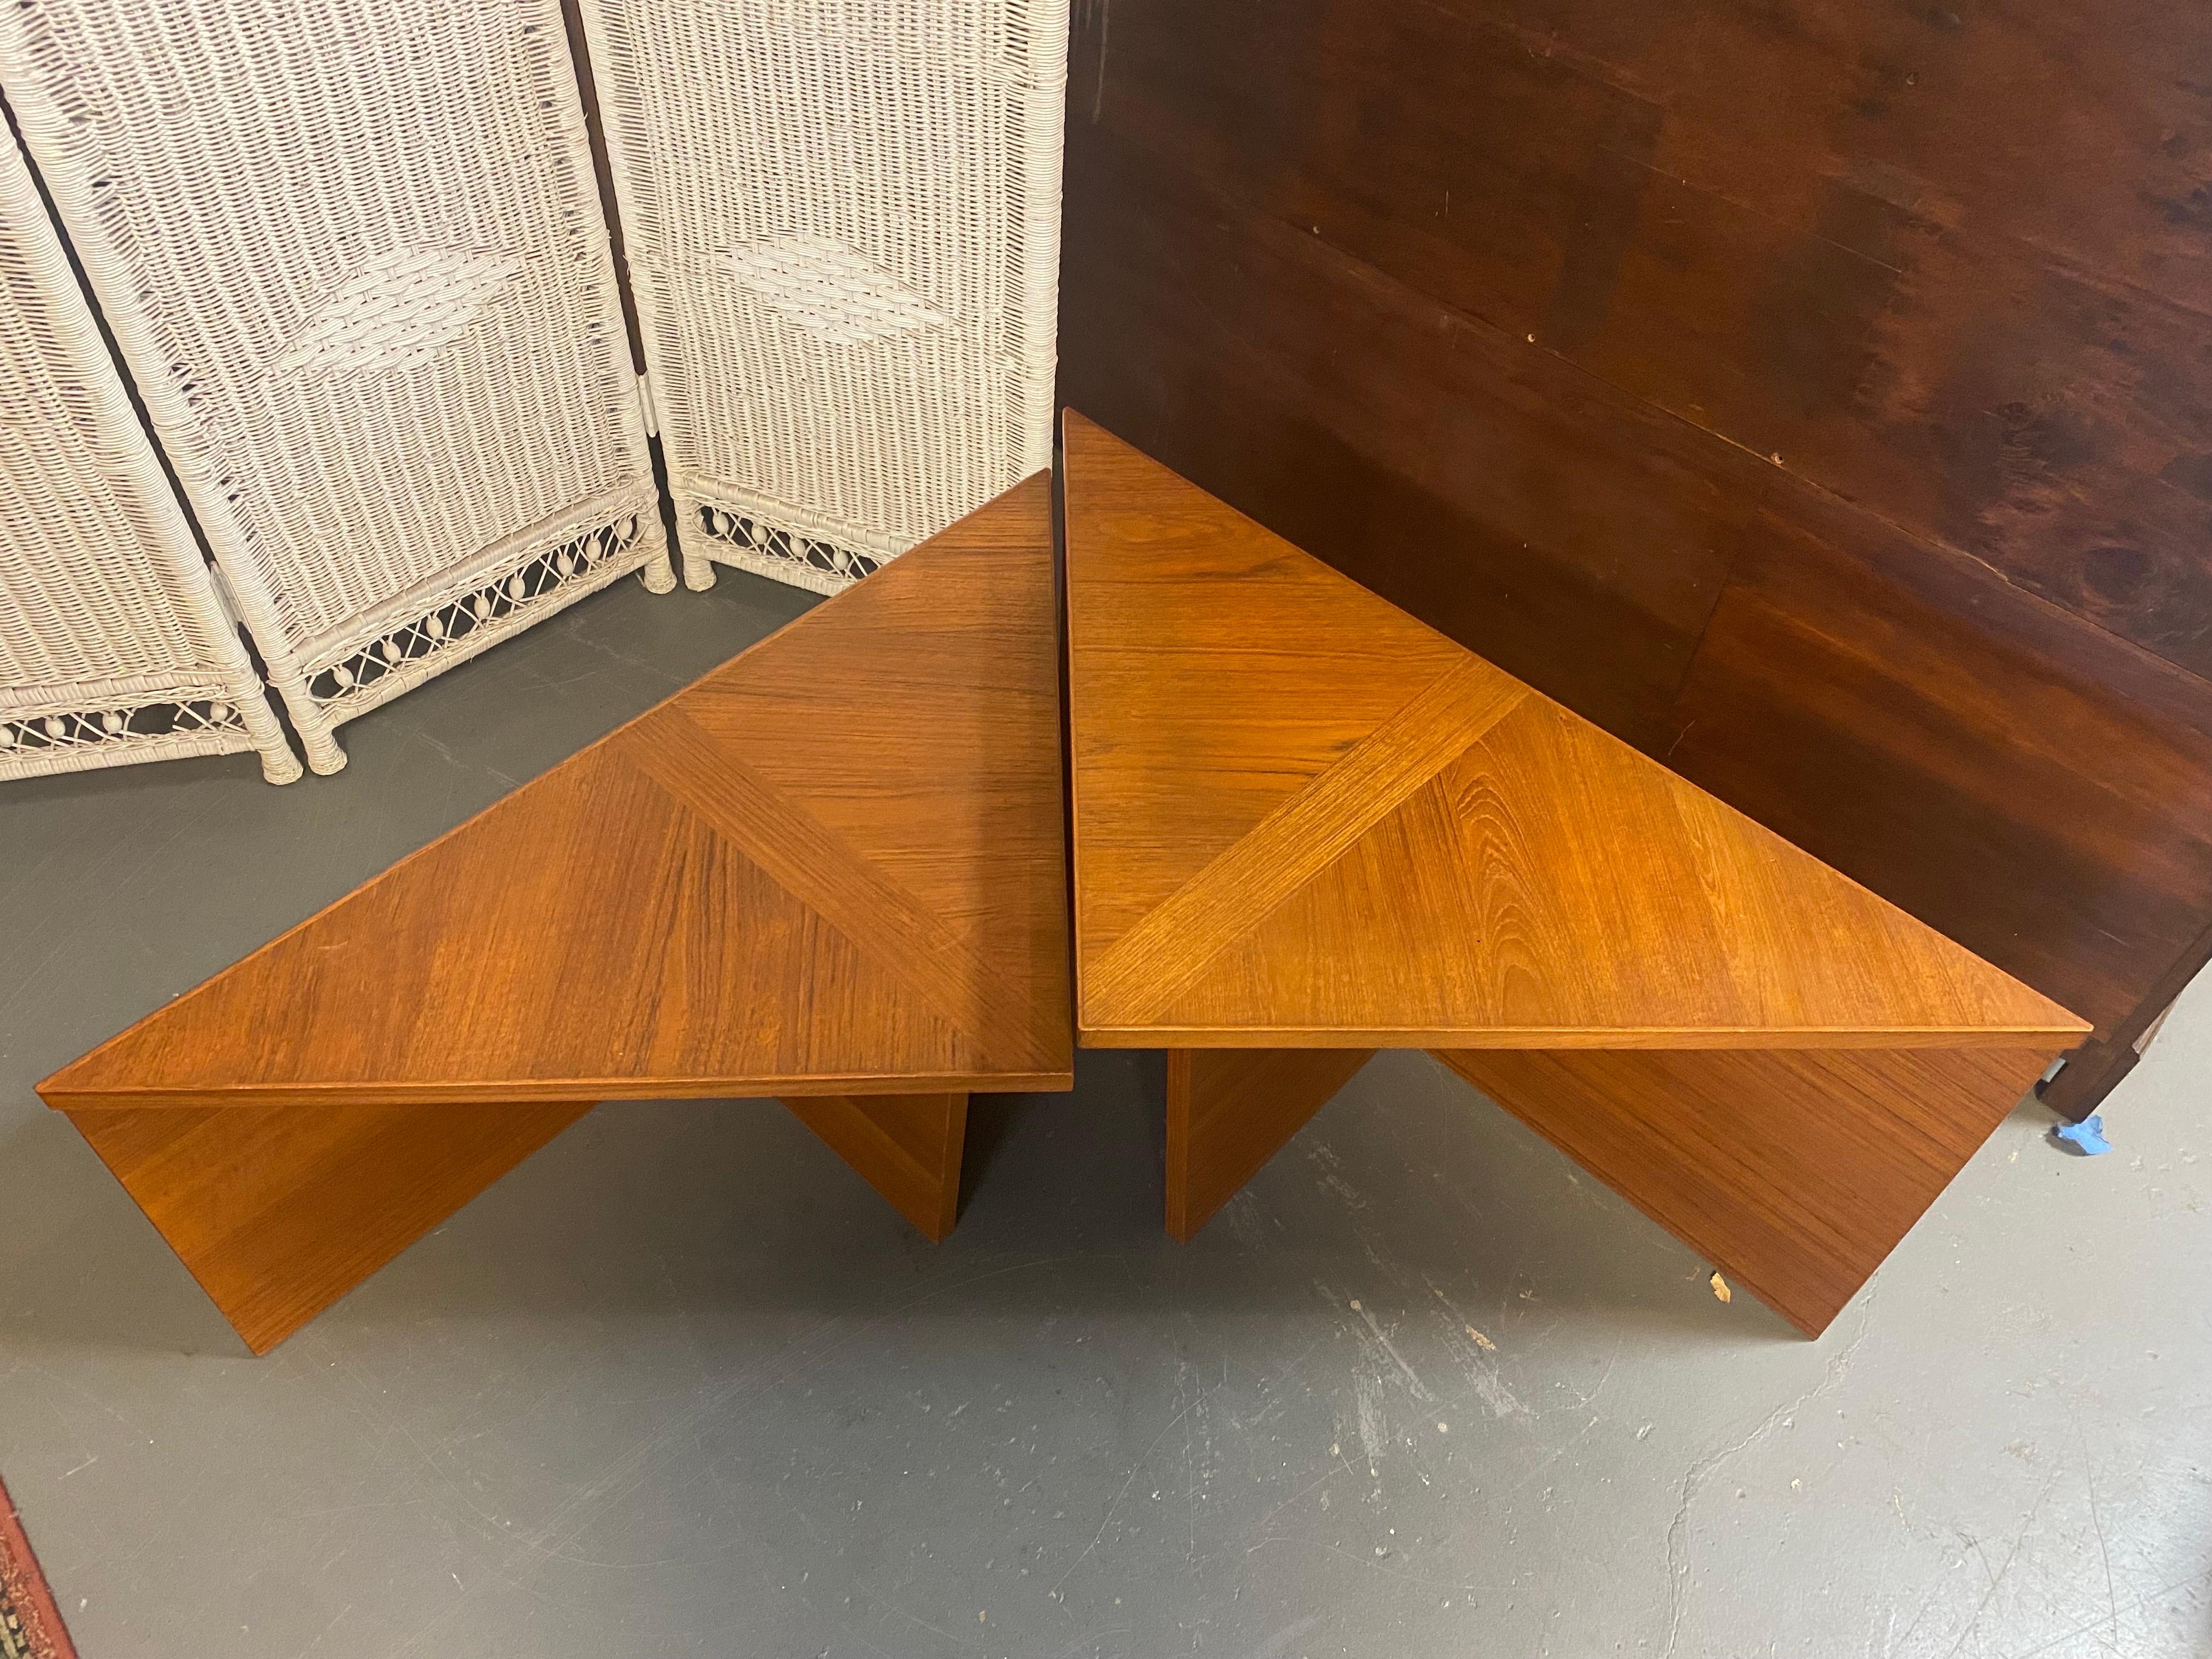 Beautiful Danish Mid-Century Modern pair of teak triangle side tables with the same surface dimensions, but different heights. The tables stand out due to their simple and straightforward design and shape. These tables are versatile and can be